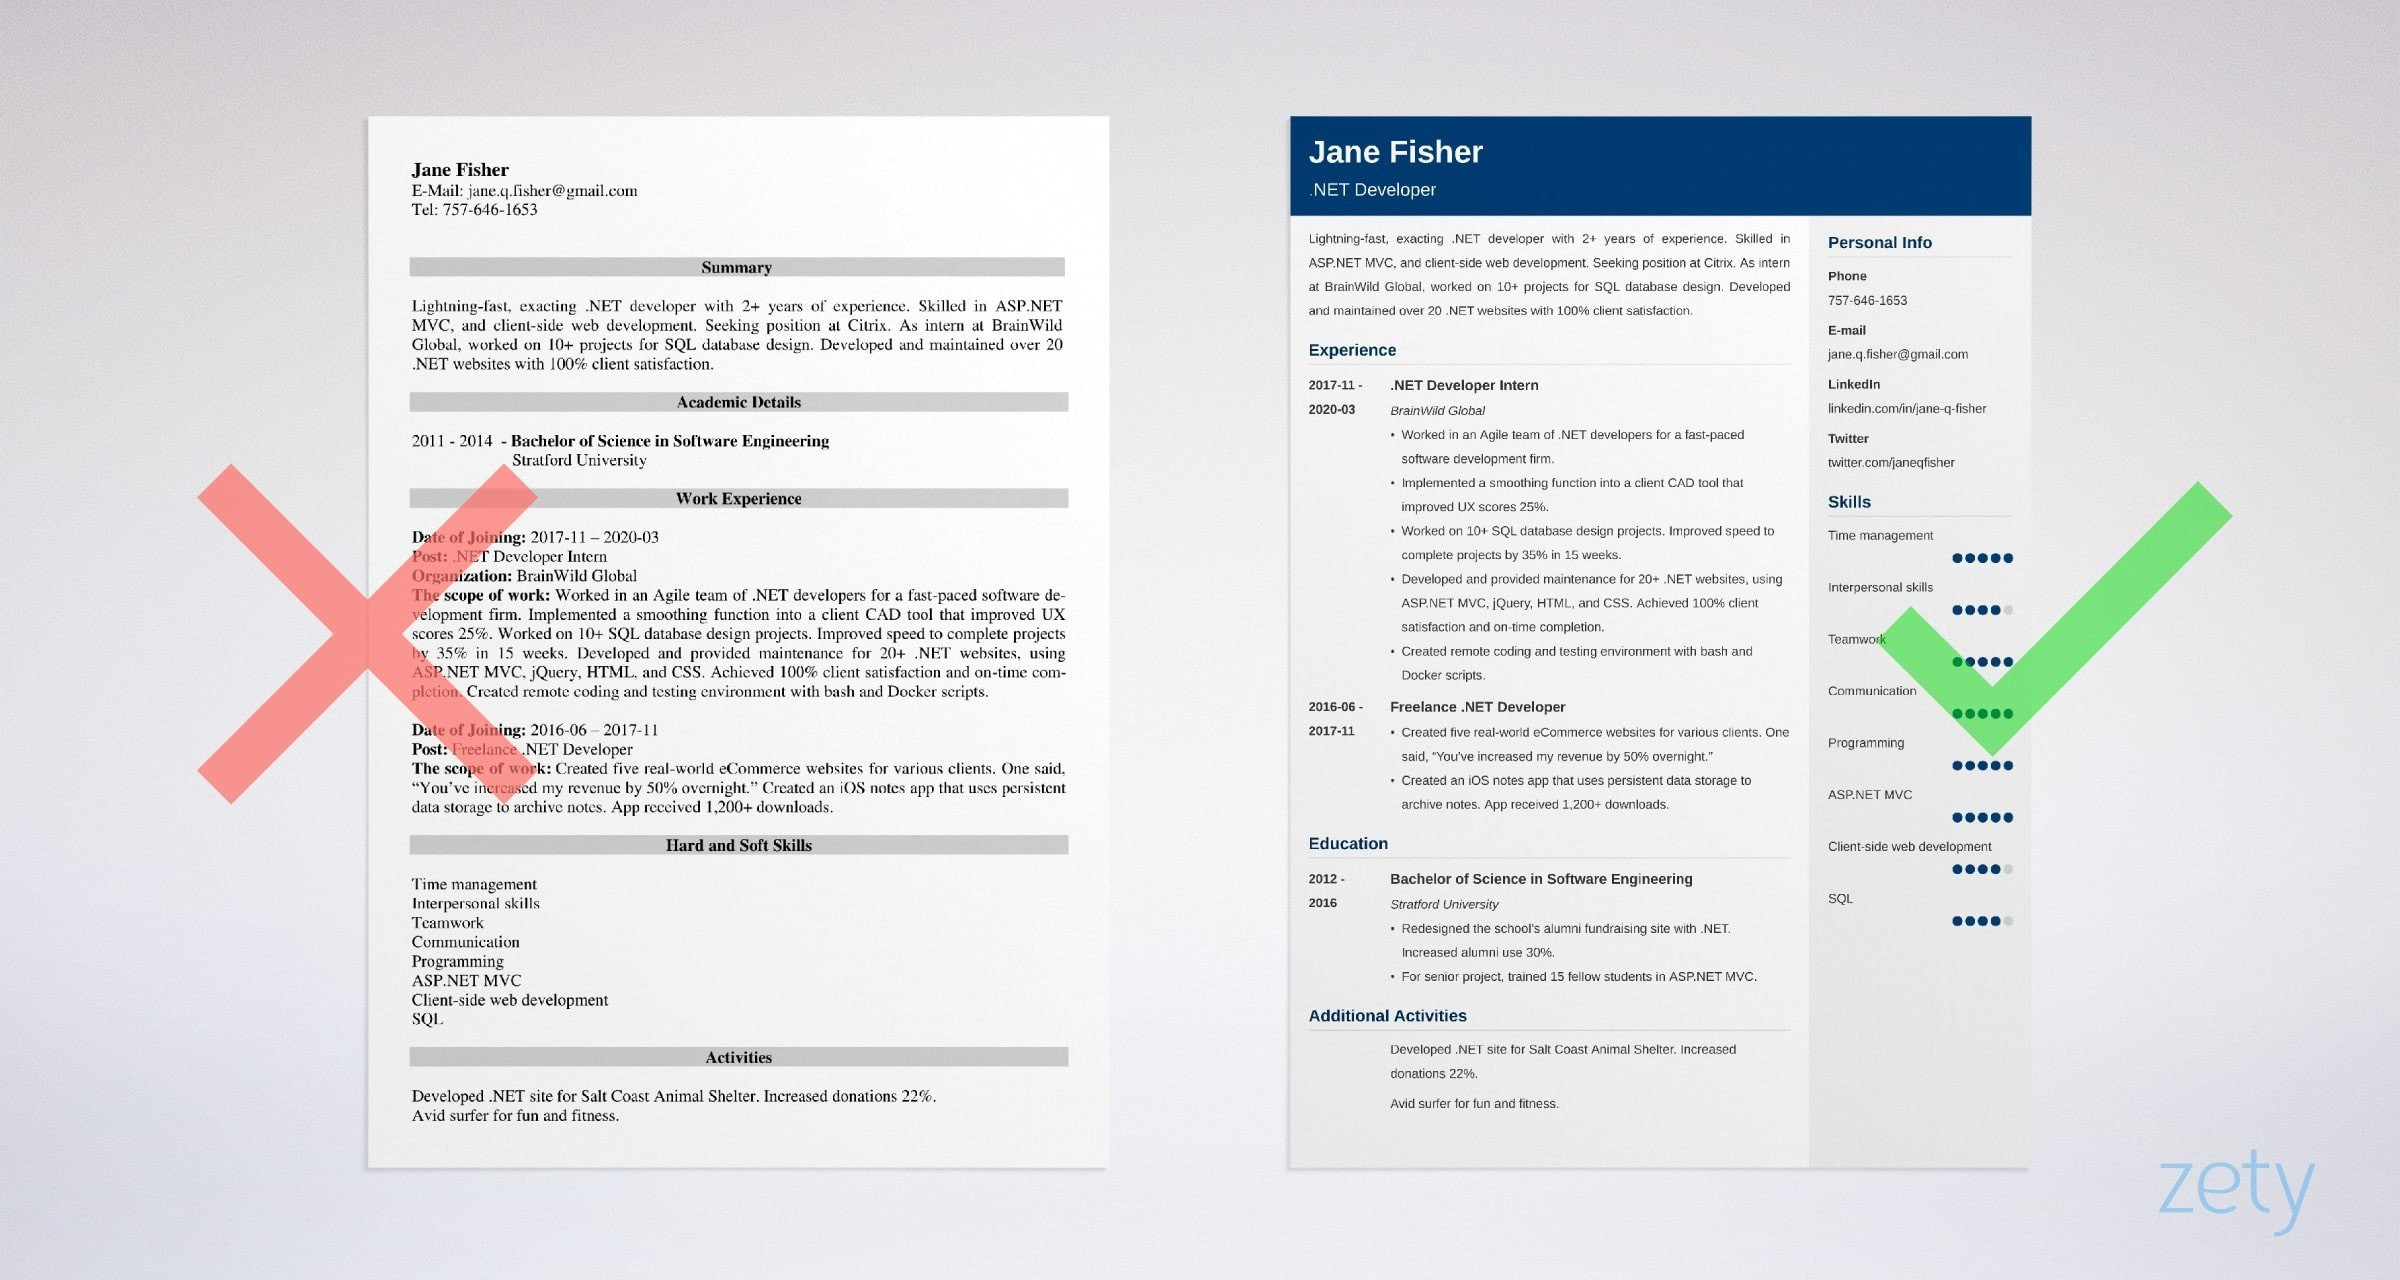 Sample Resume for Experienced asp.net Developer Net Developer Resume Samples [experienced & Entry Level]